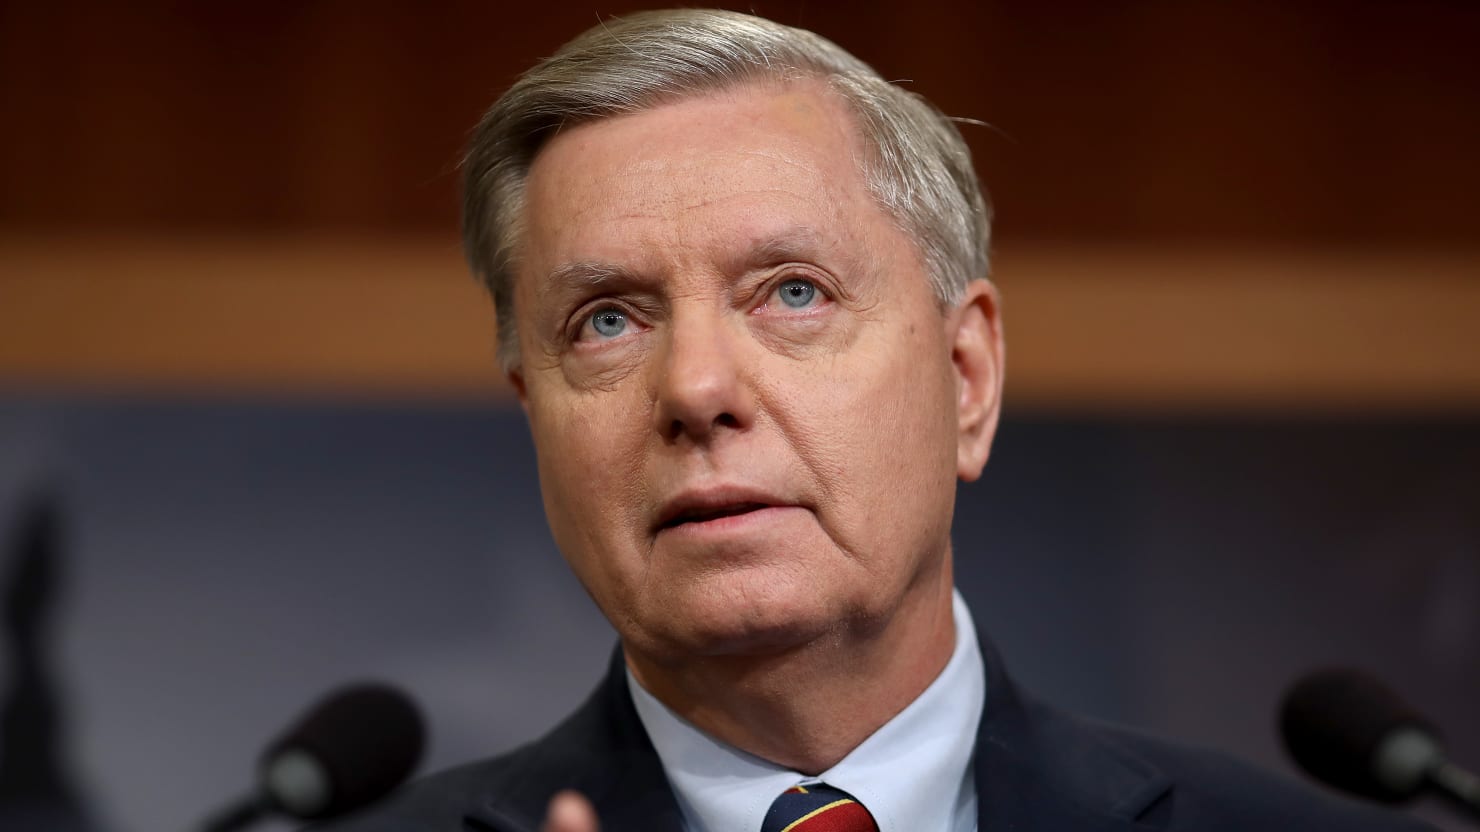 Lindsey Graham’s call to the Georgia elections, official part of the criminal investigation, WaPo reports